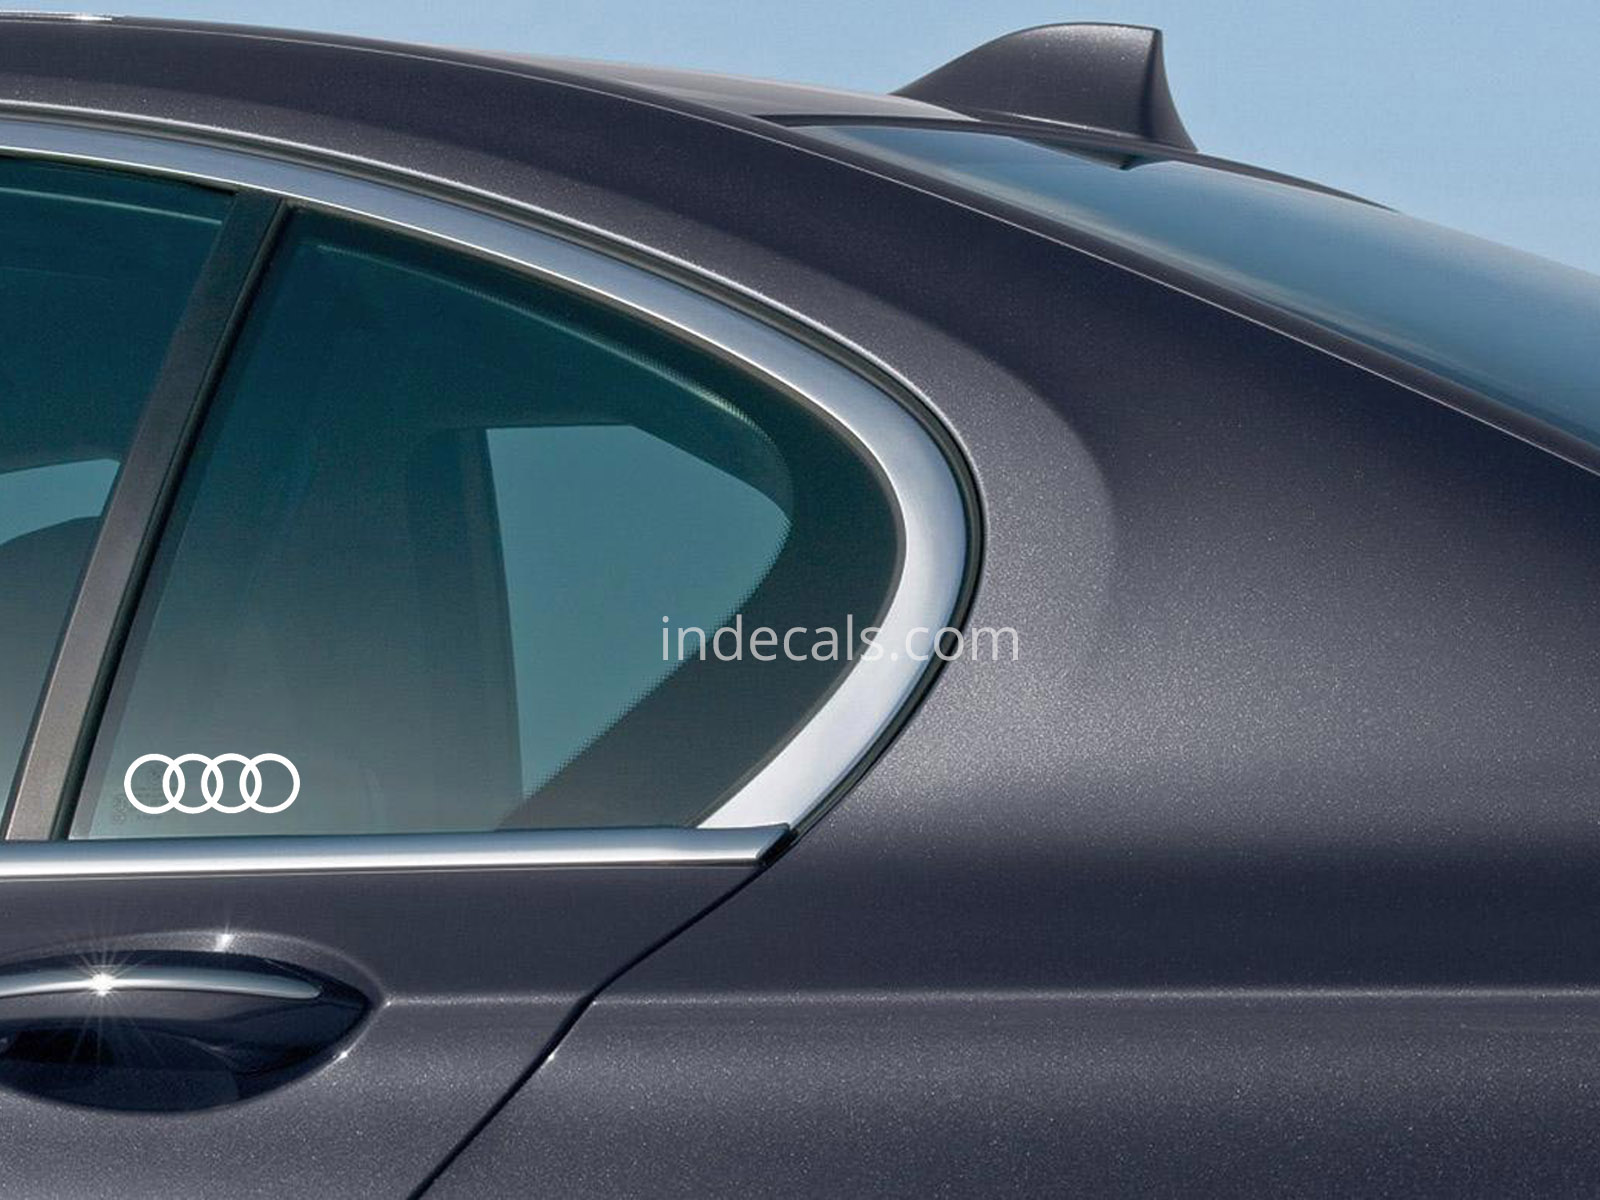 3 x Audi Rings Stickers for Rear Window - White